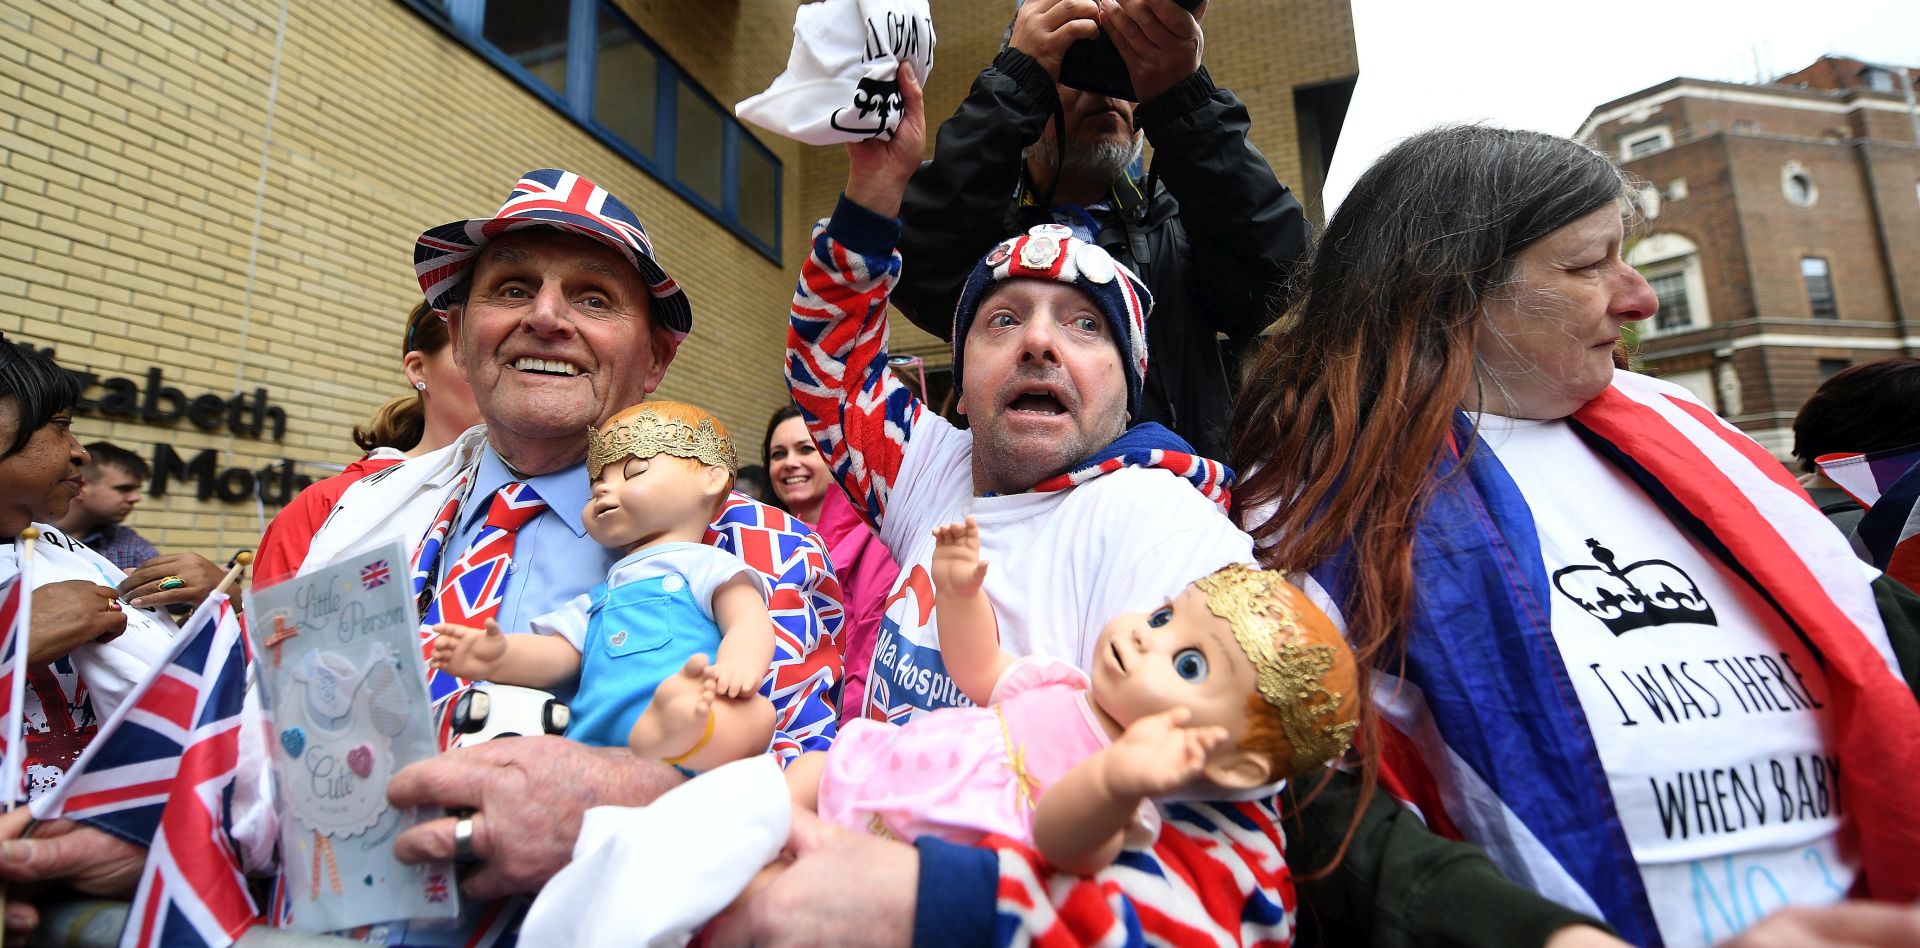 epa06686847 Royal well-wishers gather outside the Lindo Wing of St. Mary's hospital in London, Britain, 23 April 2018. Kensington Palace has announced that the Duchess of Cambridge is in the early stages of labour and is expected to give birth to her third child at the Lindo Wing in London.  EPA/ANDY RAIN